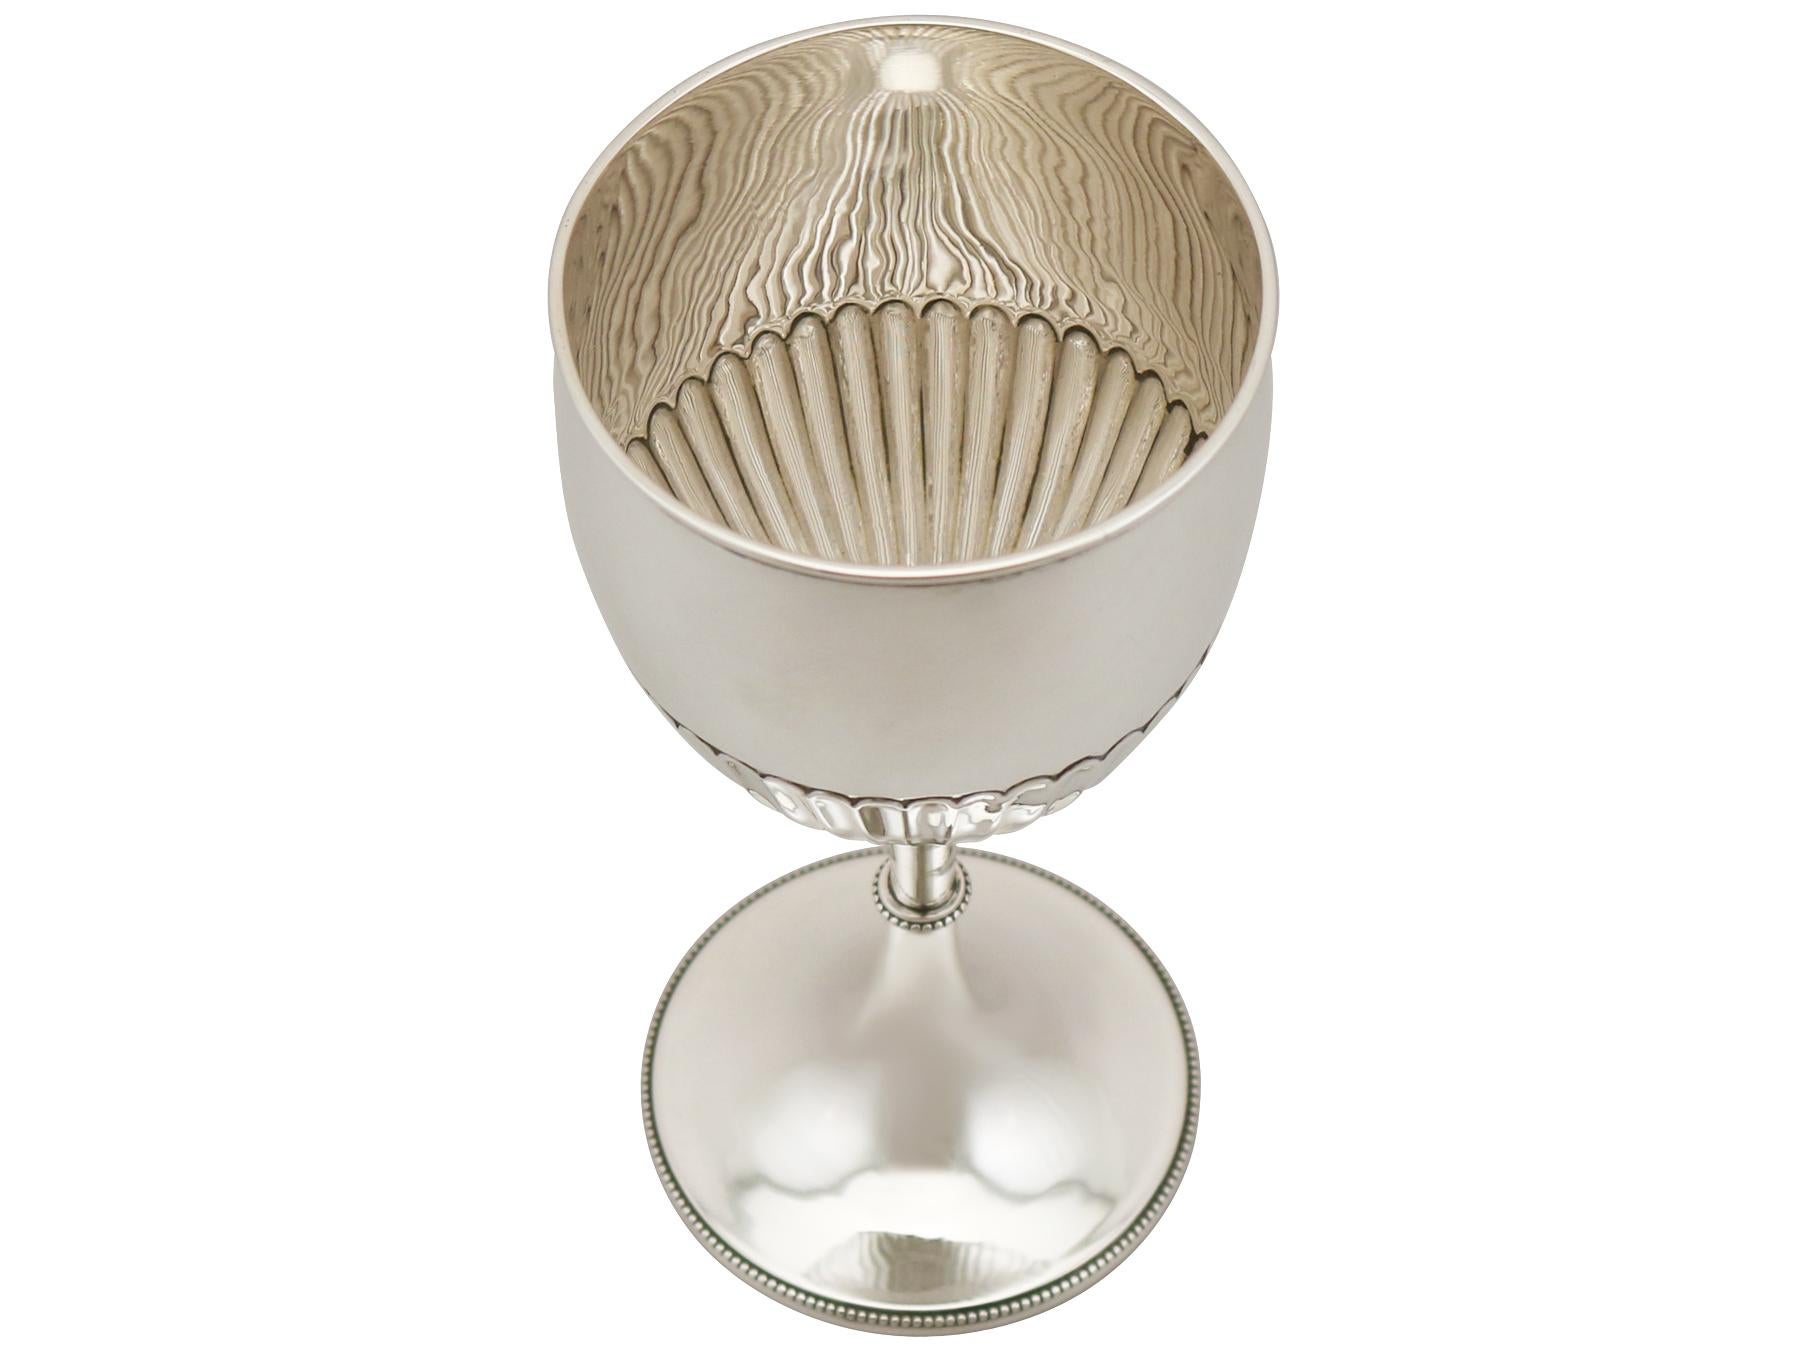 Late 19th Century Victorian English Sterling Silver Goblet by Richards & Brown